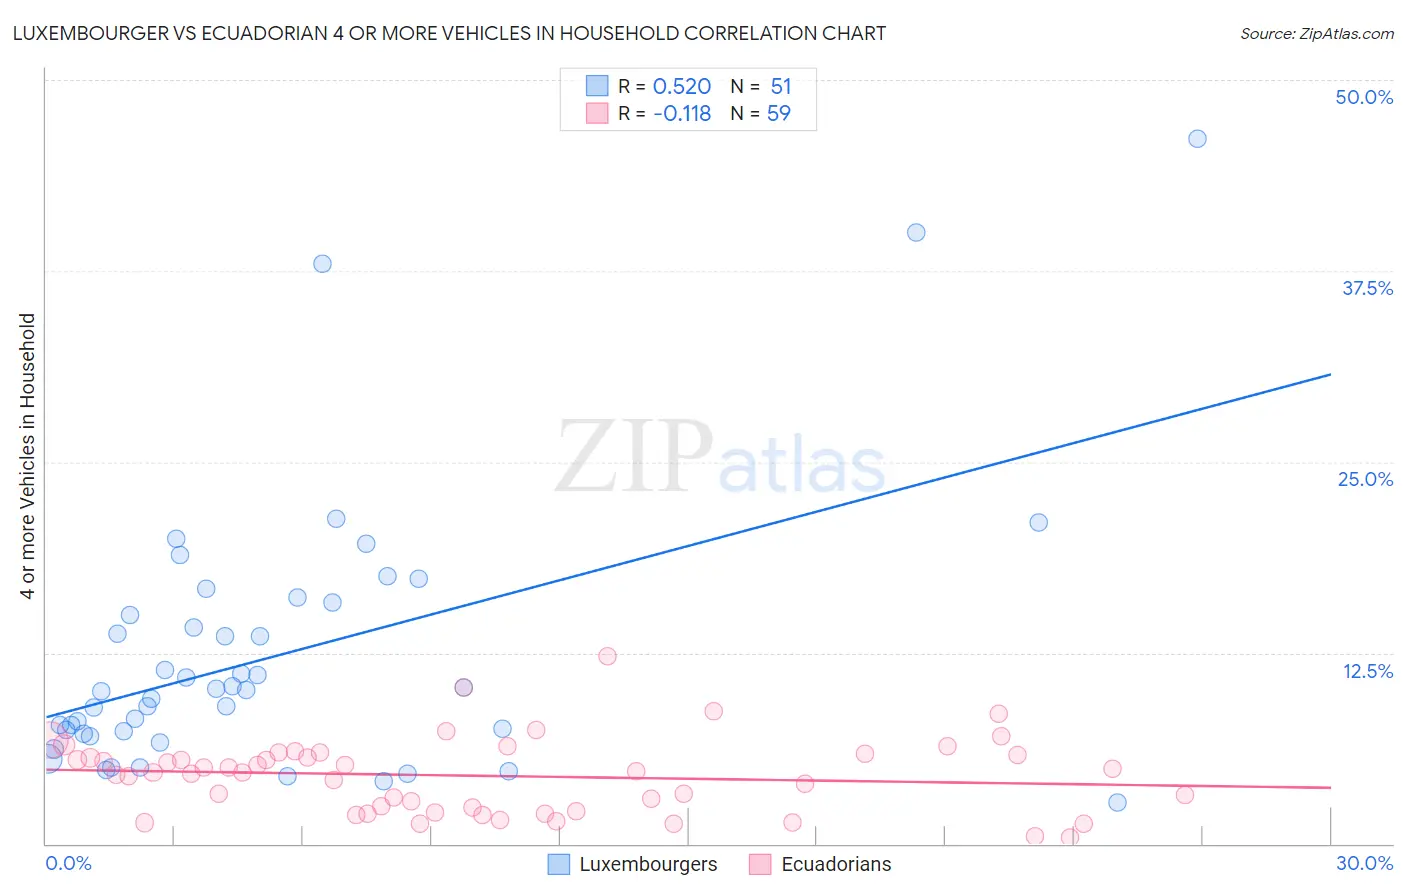 Luxembourger vs Ecuadorian 4 or more Vehicles in Household